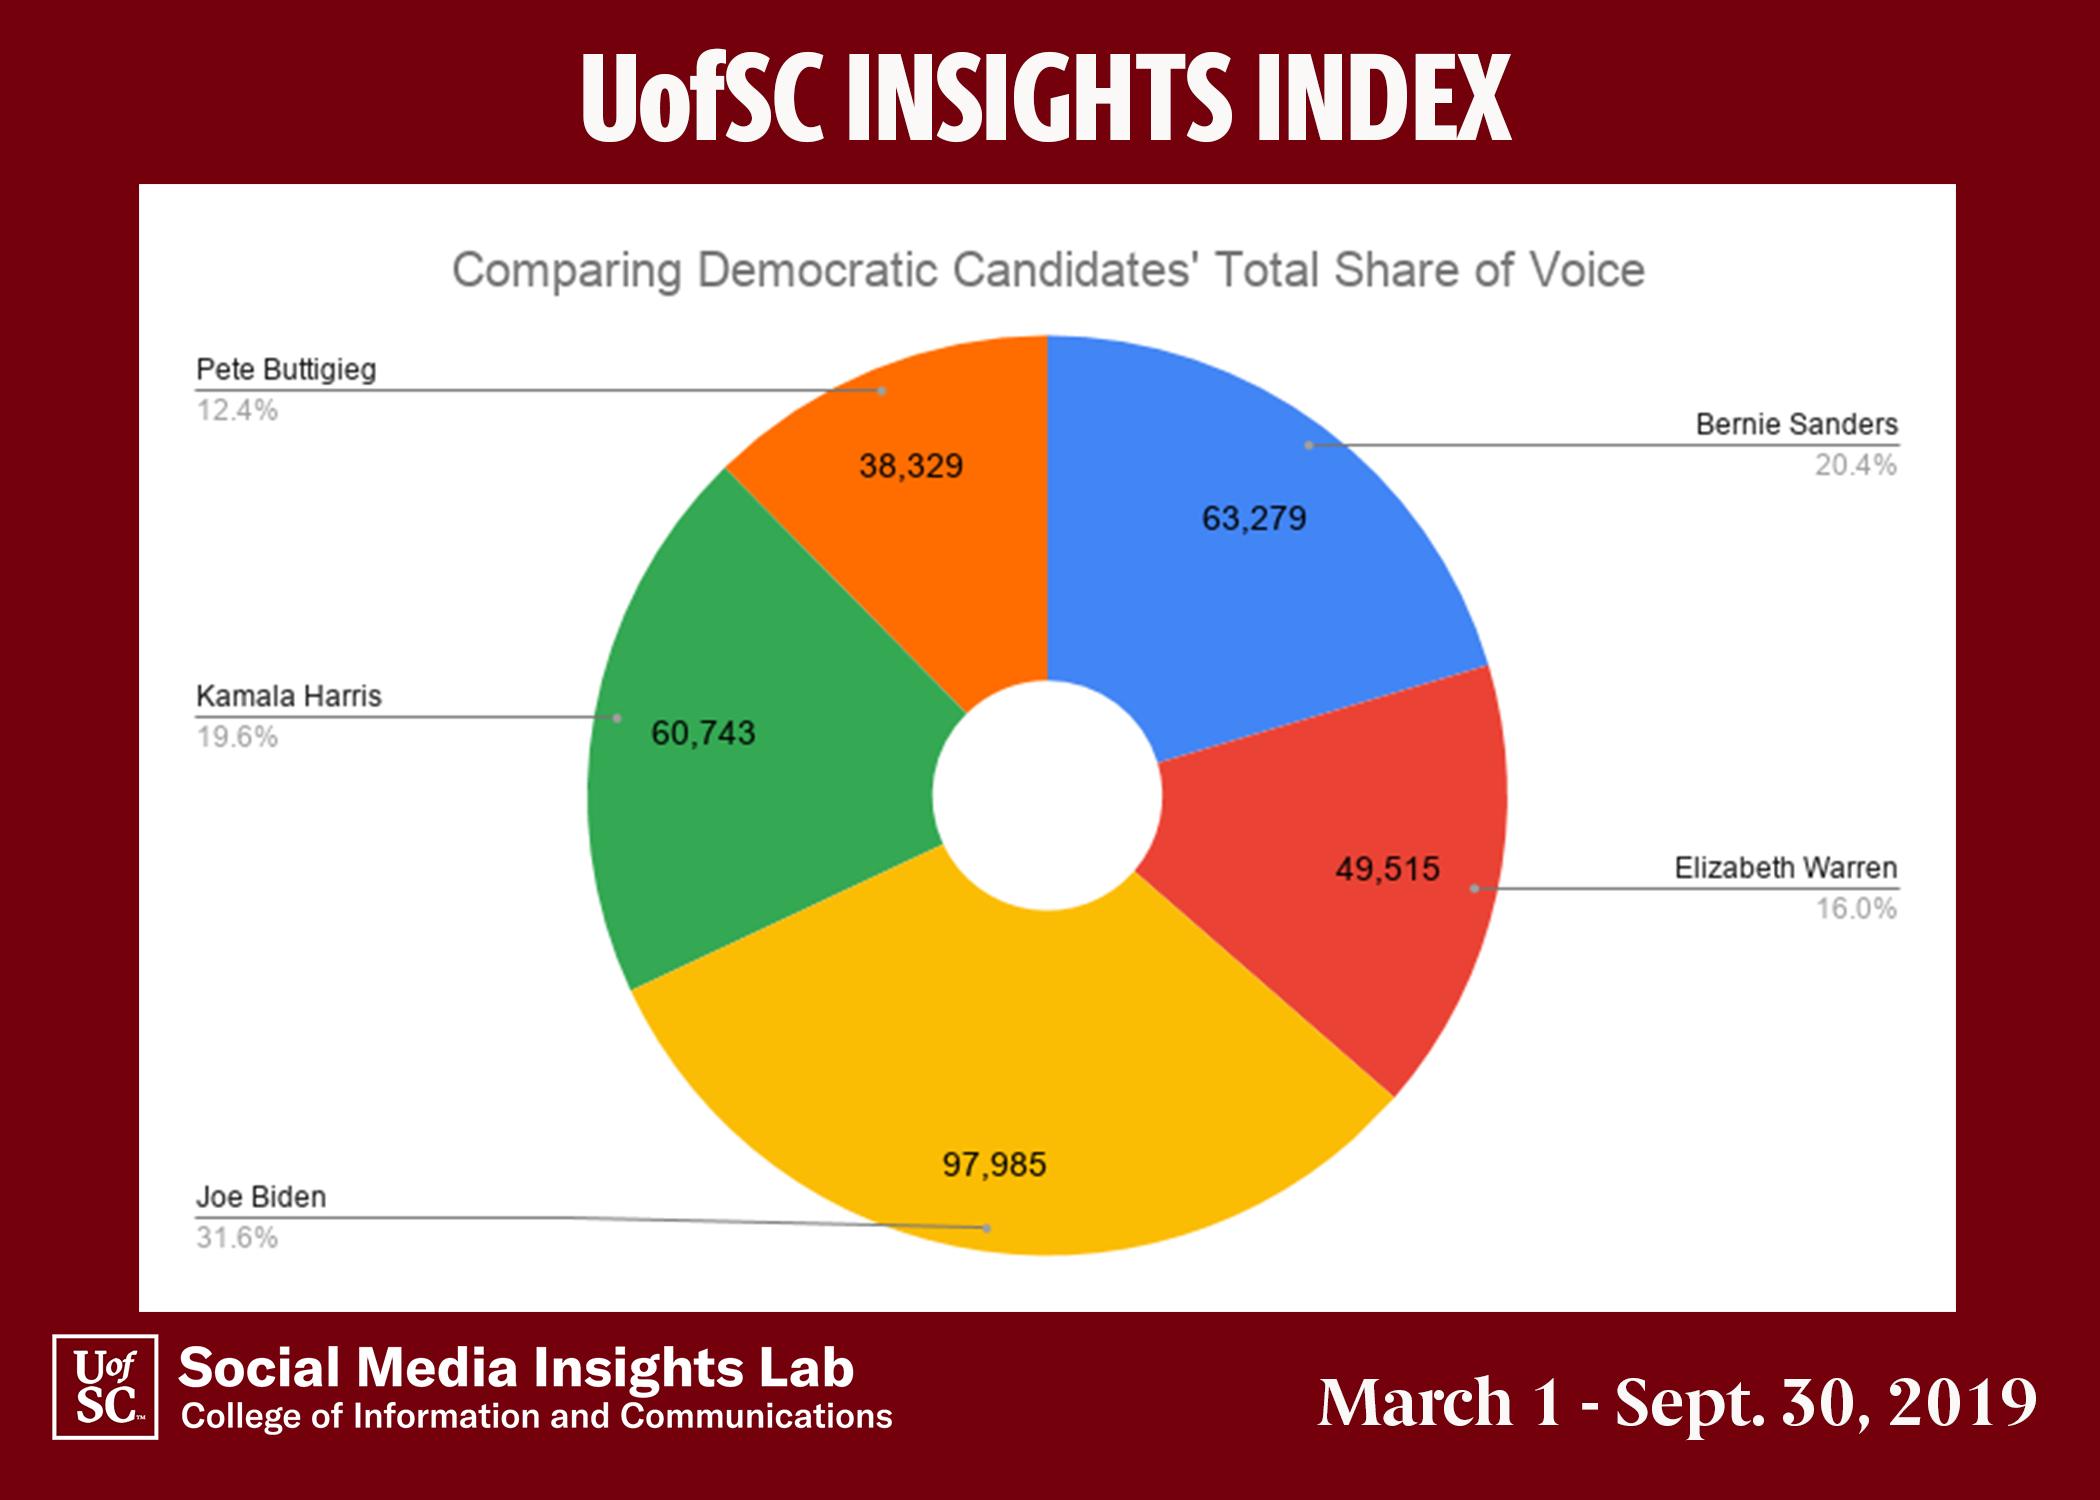 Joe Biden has had the highest name recognition since putting his hat in the ring to be the Democratic nominee, and that is still the case in South Carolina. All together from March until Sept., Joe Biden has the highest share of voice on social in SC.